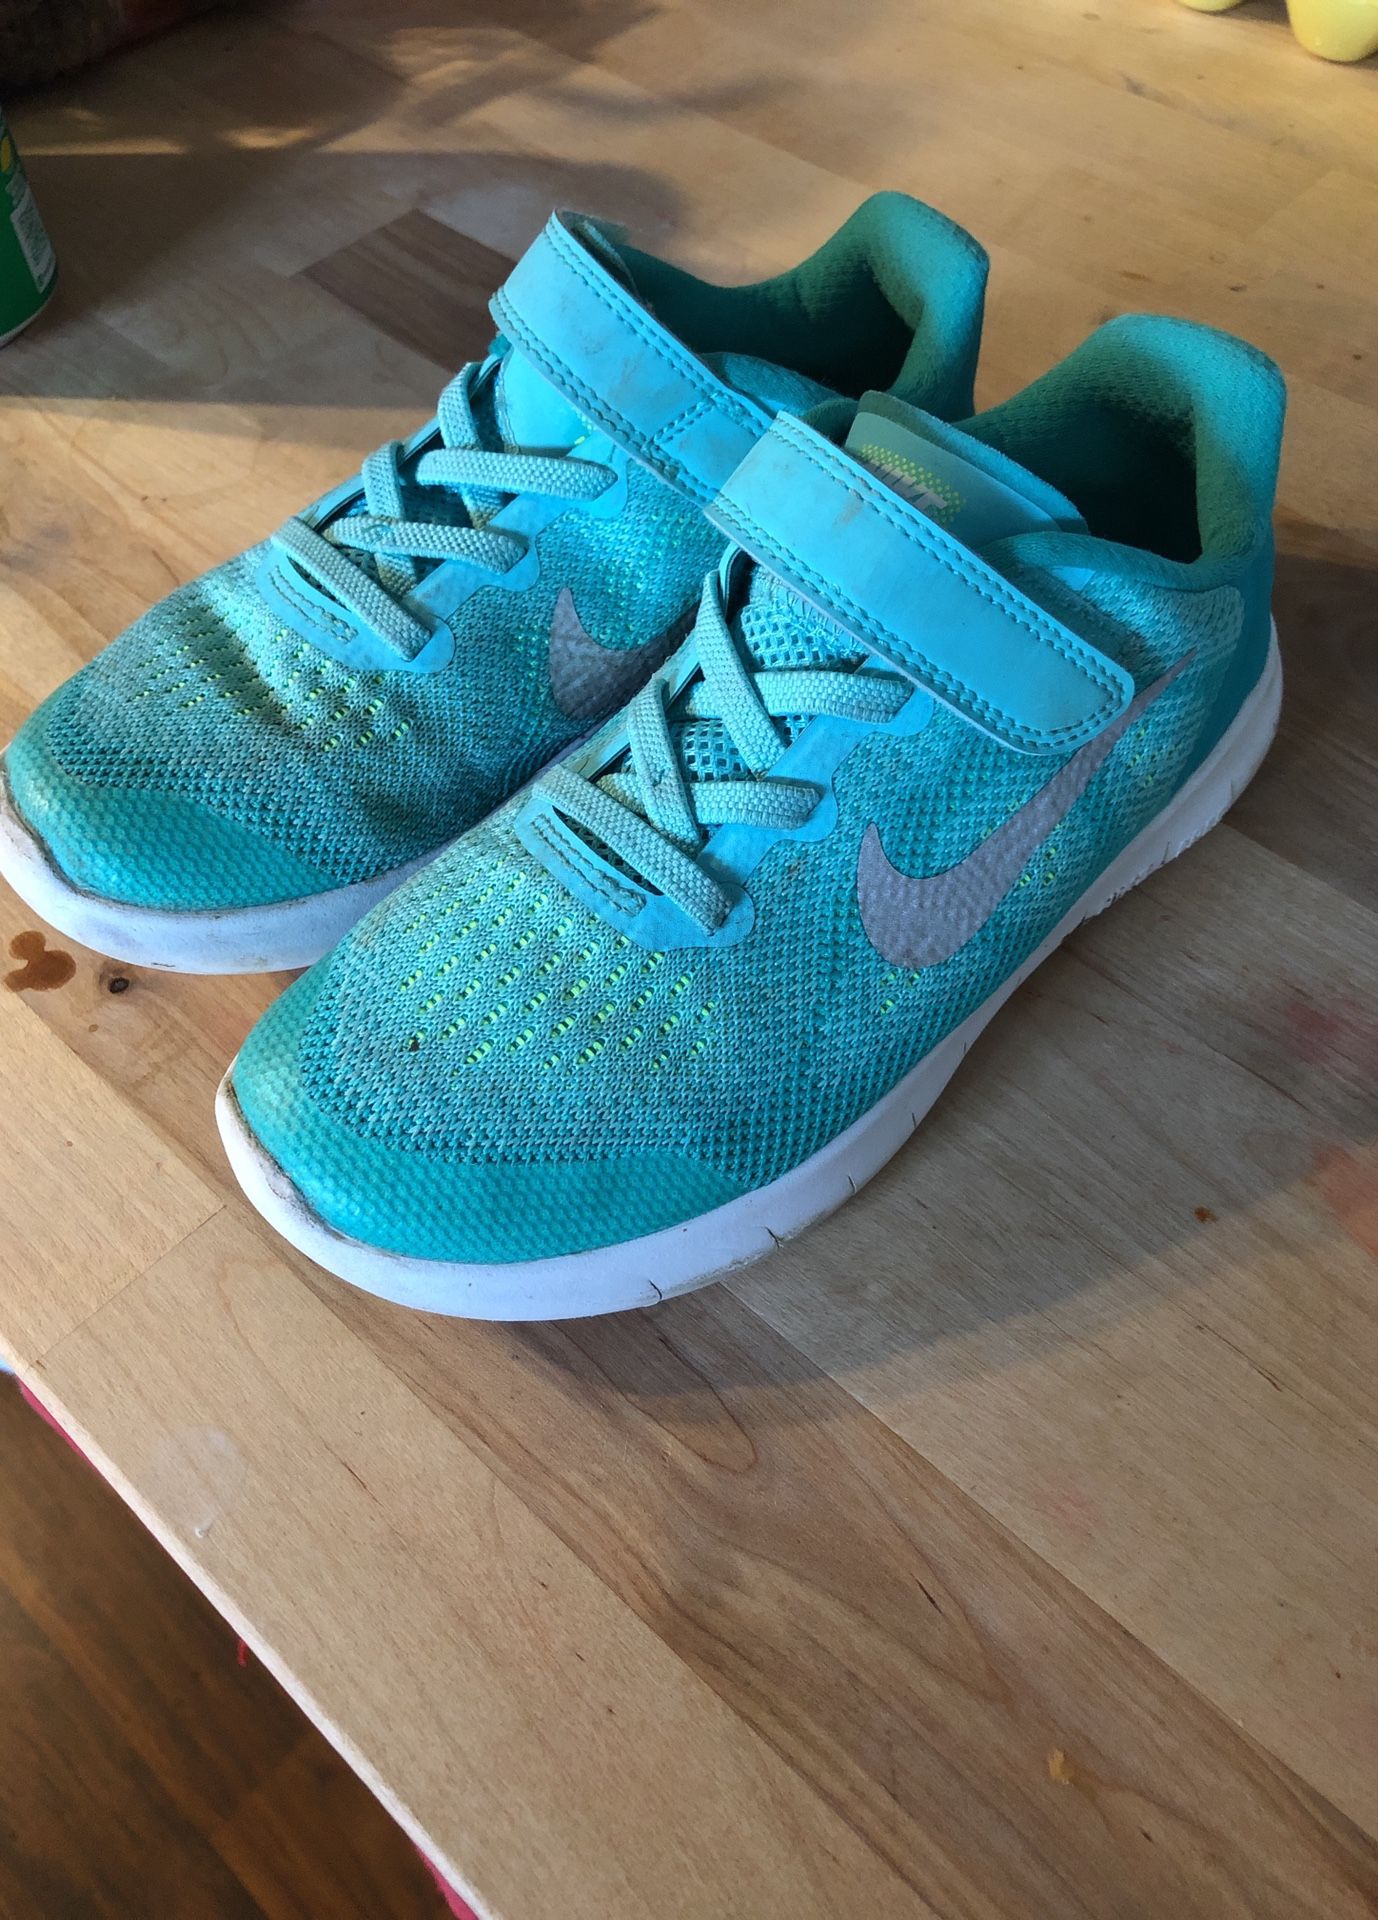 Girls Nike shoes size 13.5c good condition